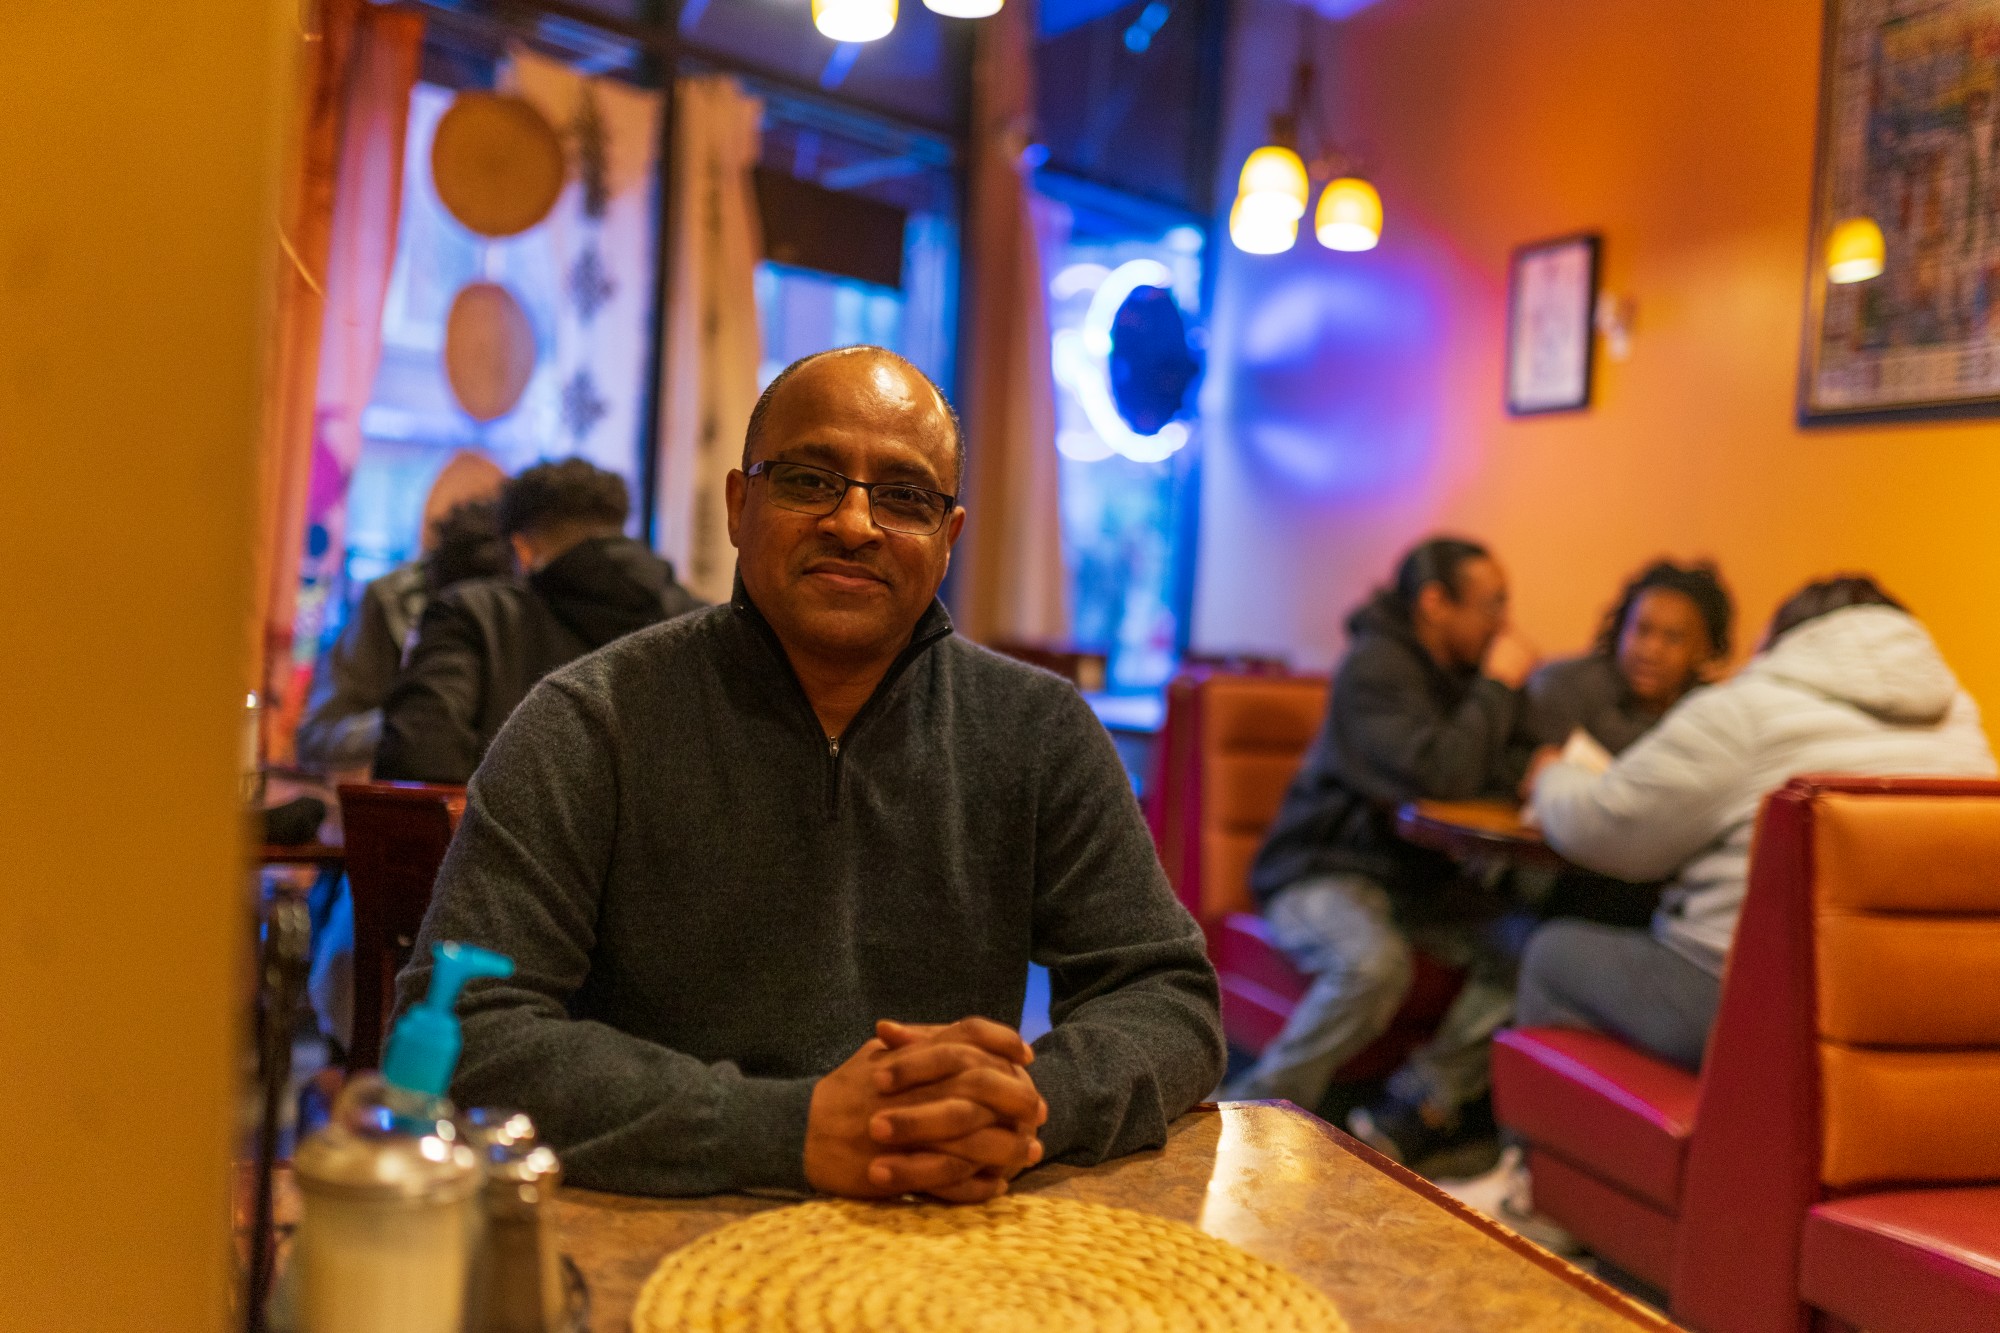 Restaurant Owner Russom Solomon poses for a portrait inside his business, Red Sea, on Friday, Feb. 28. Solomon is vocal in his opposition to the new community center development across the street, citing the developers failure to properly engage with the community.